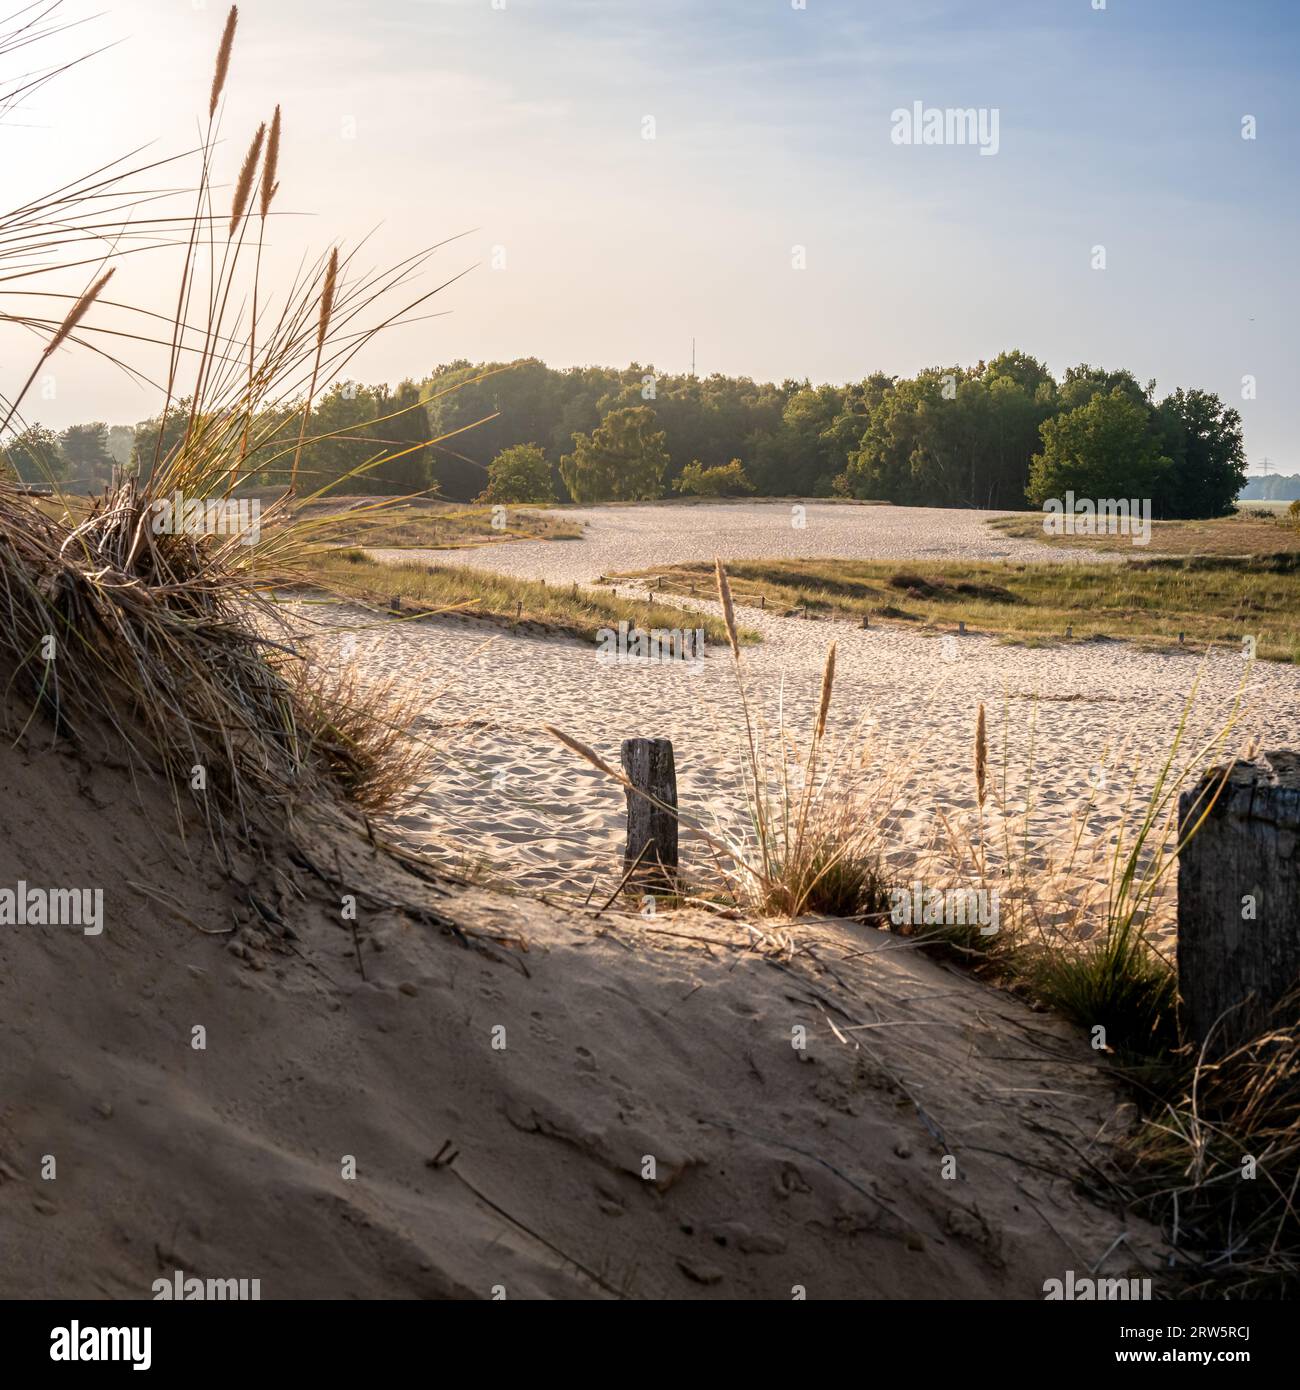 Enchanting Boberger Dünen sand dunes in Hamburg, where a sunlit path meanders among tranquil sand dunes, framed by slightly swaying dune grass and a d Stock Photo